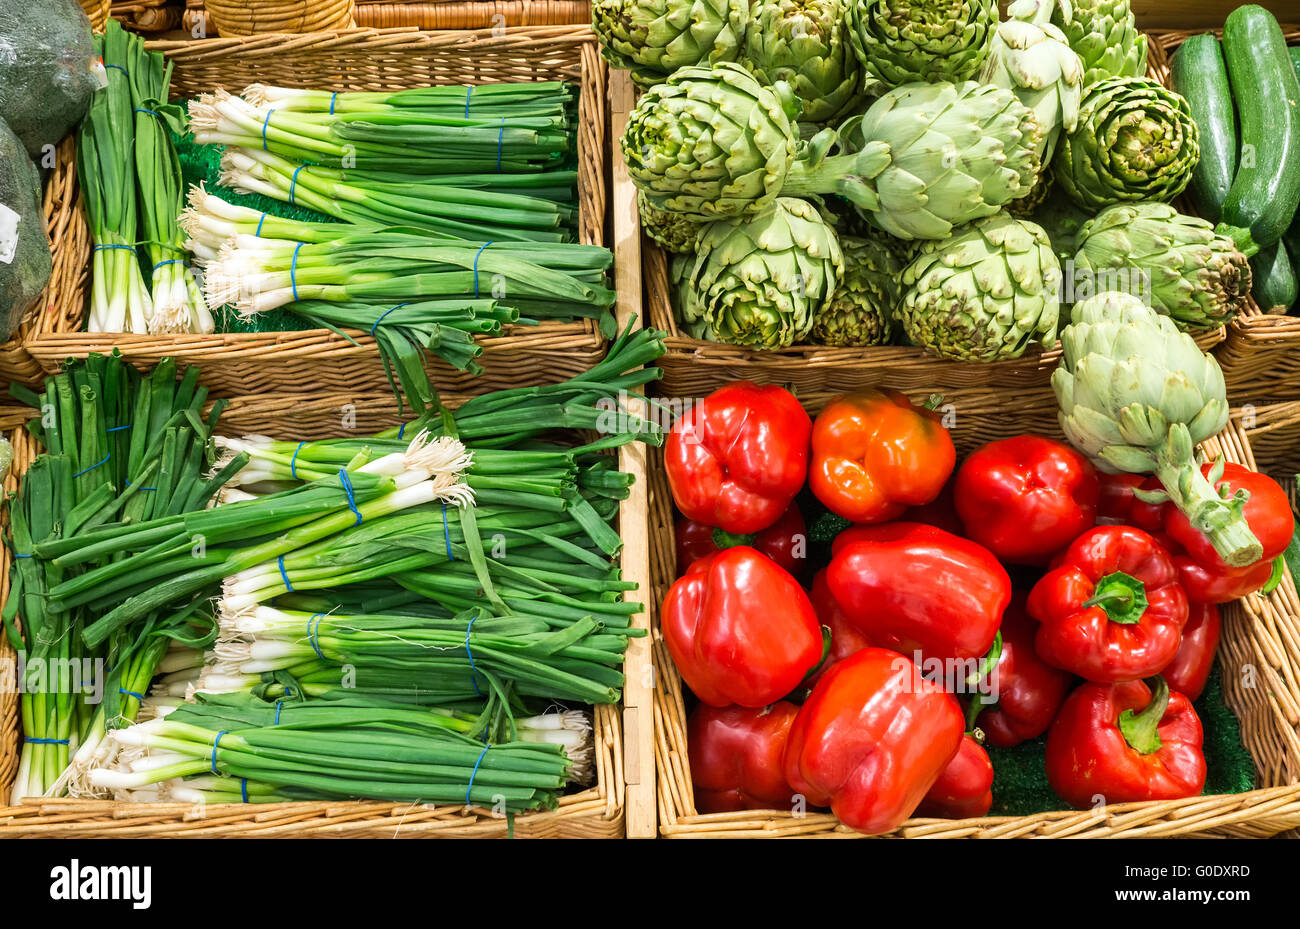 Leek, peppers and artichokes for sale at a market Stock Photo